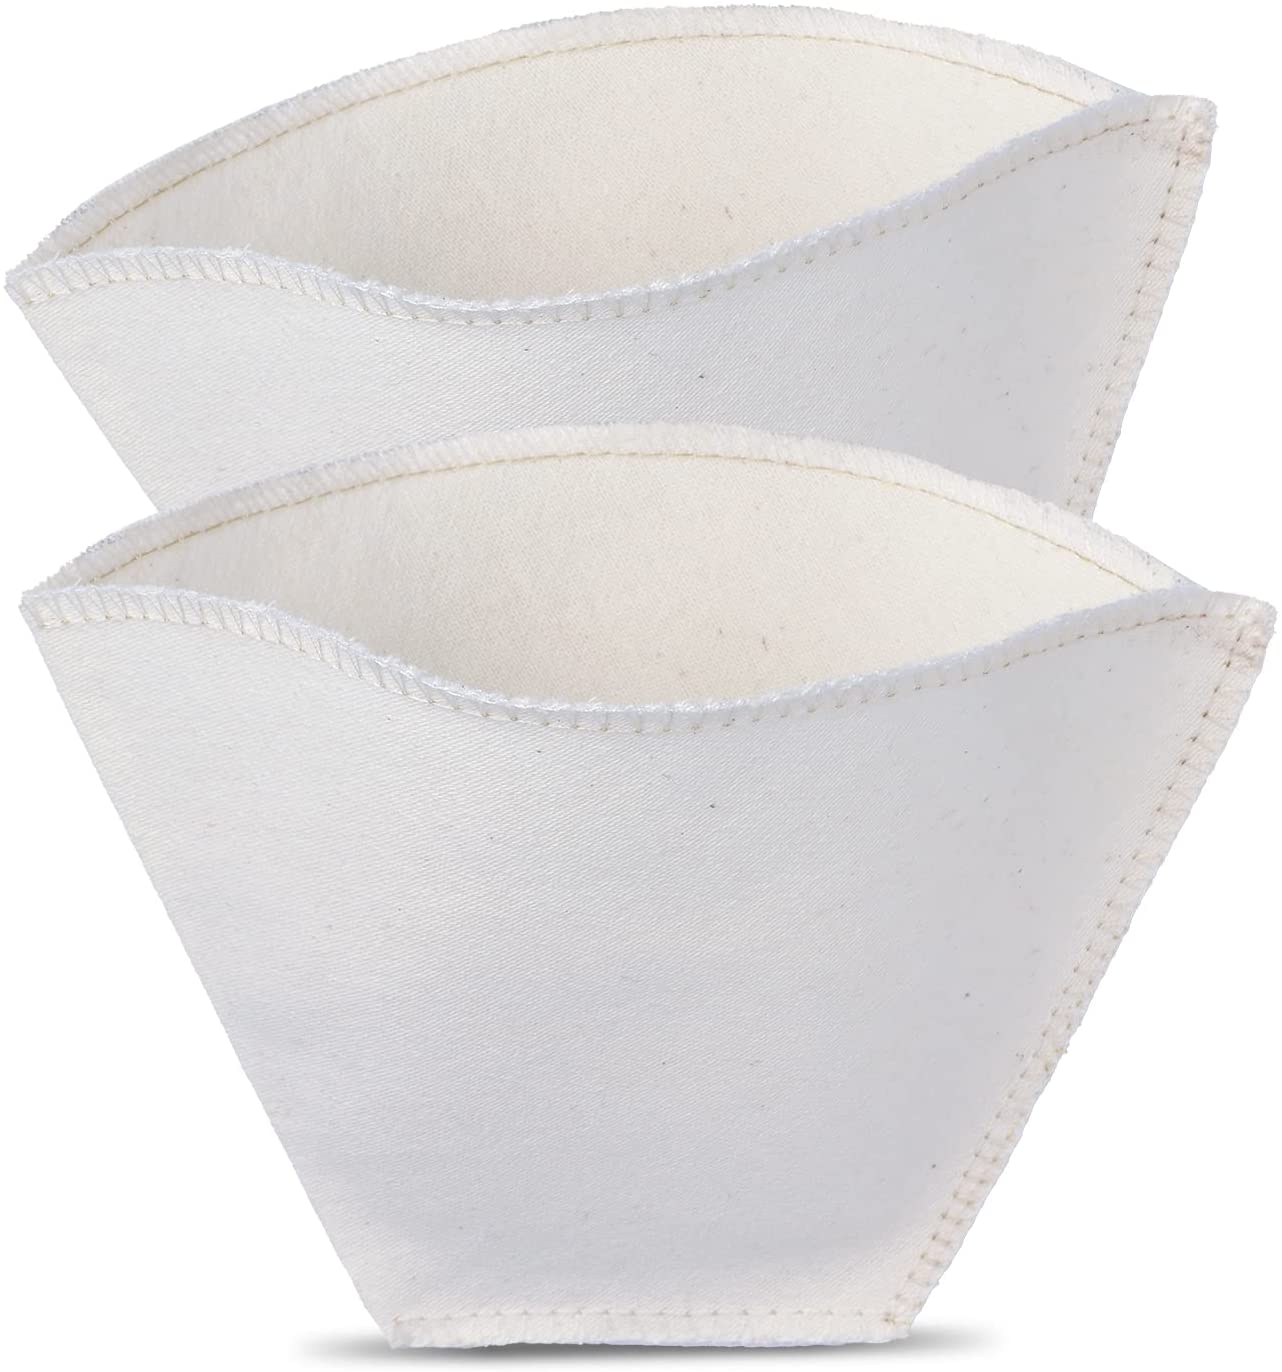 WUNDERBUY Handmade Reusable Economic Cotton Coffee Filter for Filter Coffee Machine a